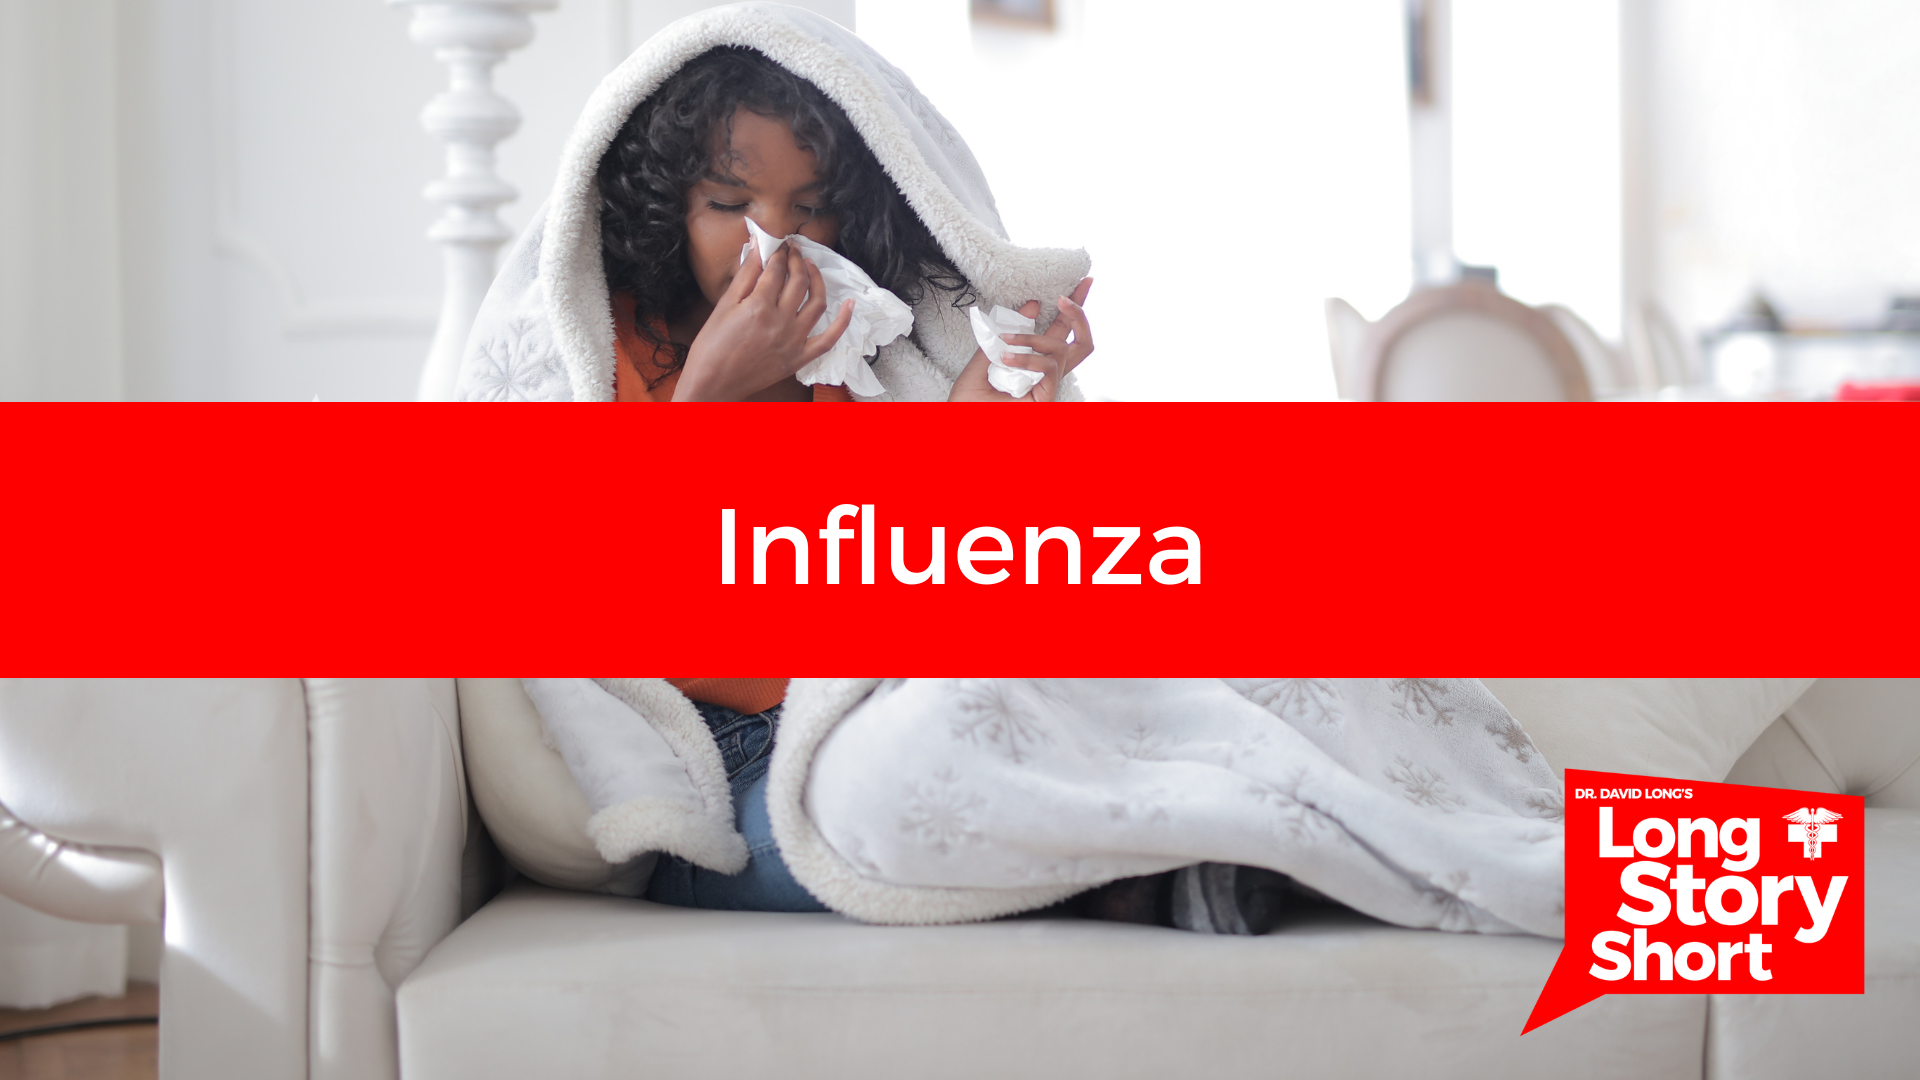 You are currently viewing Influenza – Dr. David Long